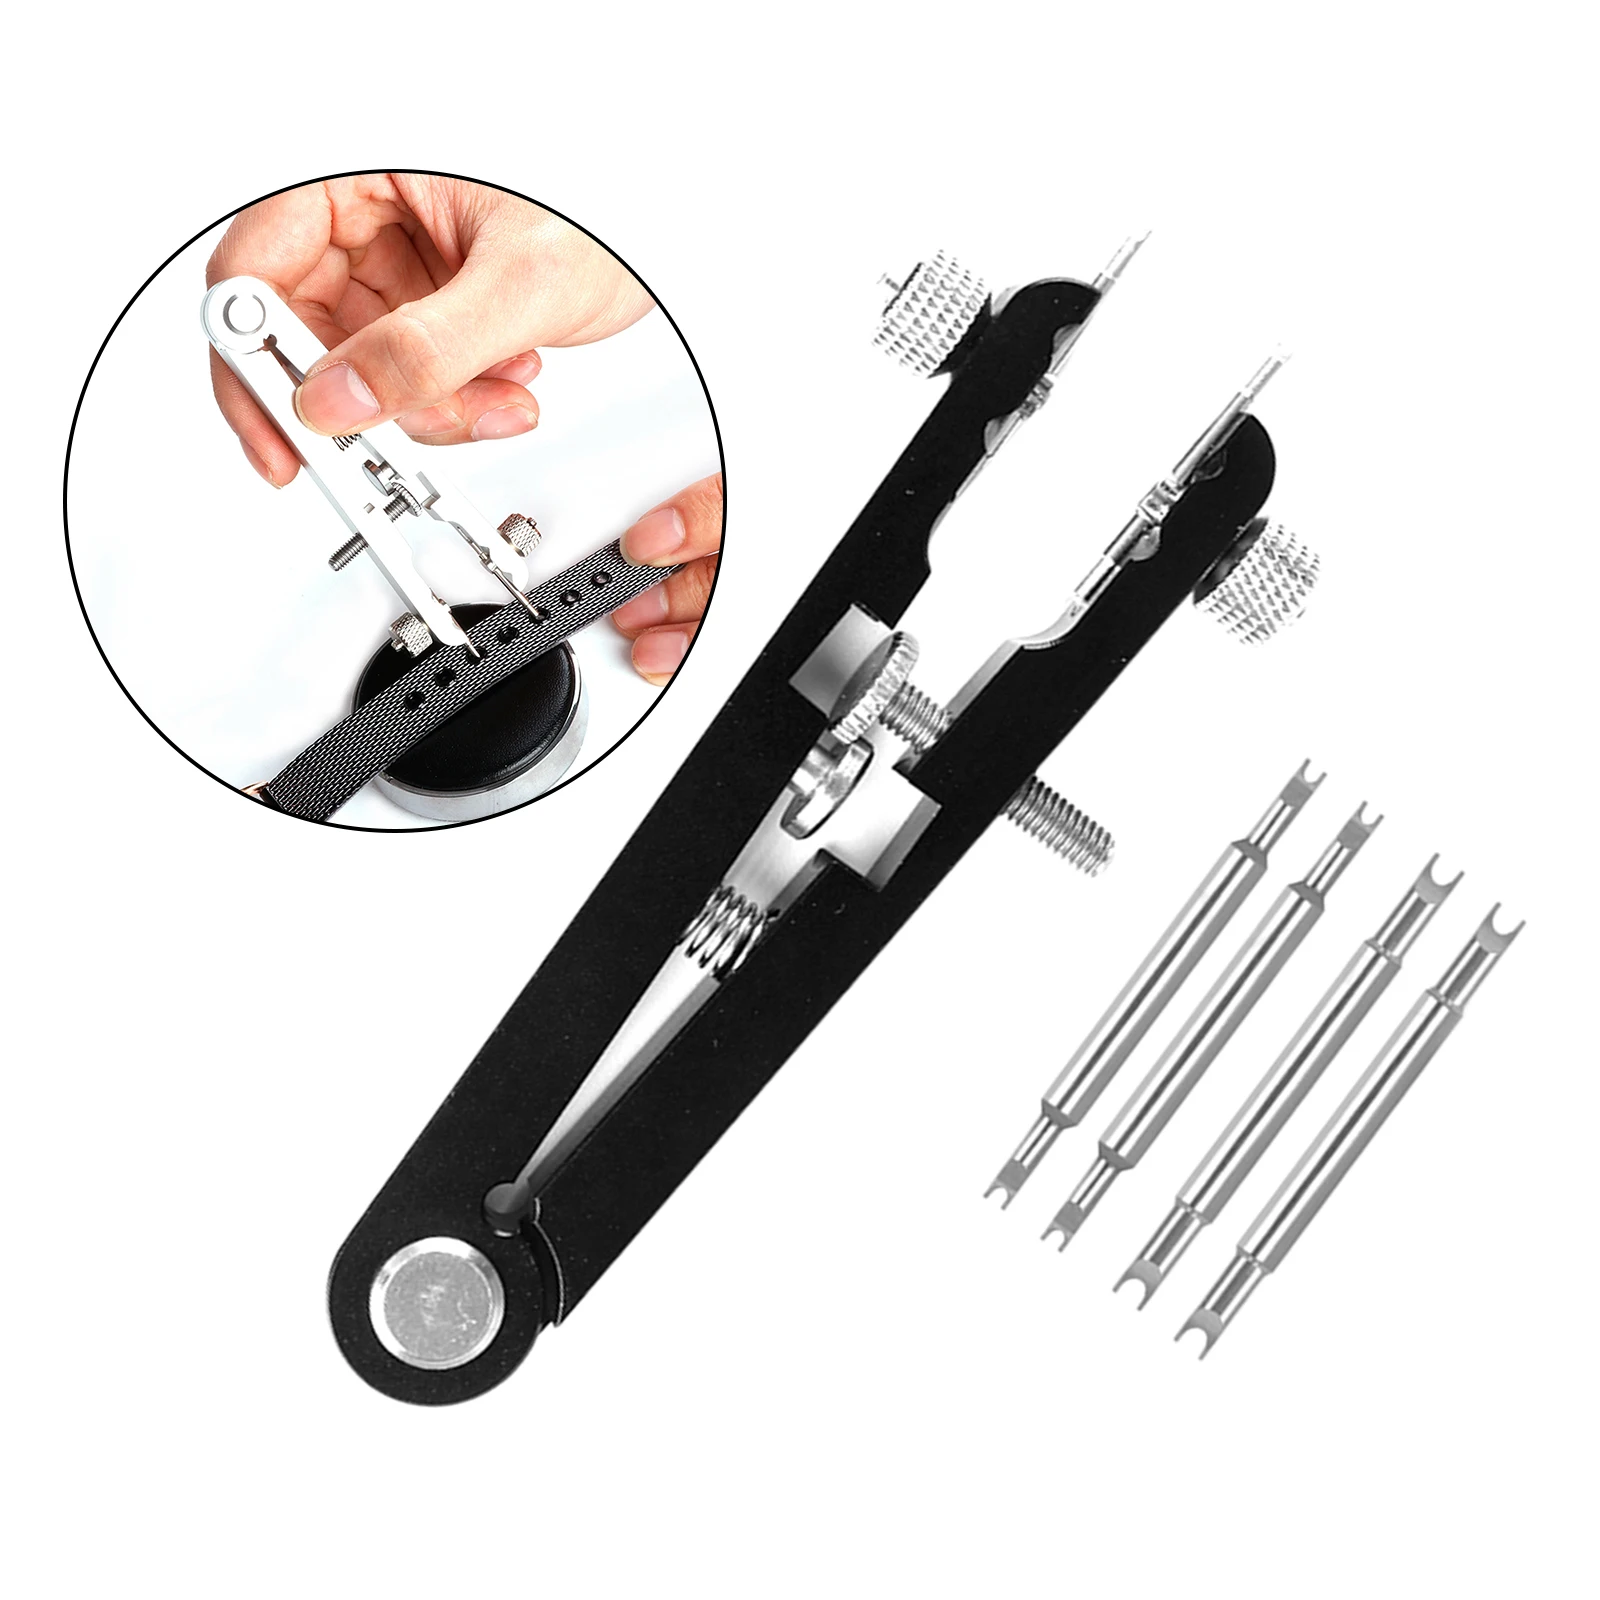 Watches Spring Bar Repair Tool Tweezer V-Shaped Disassembly Dismantling with 4 Pins 6825 Strap Band Removal Removing Tools